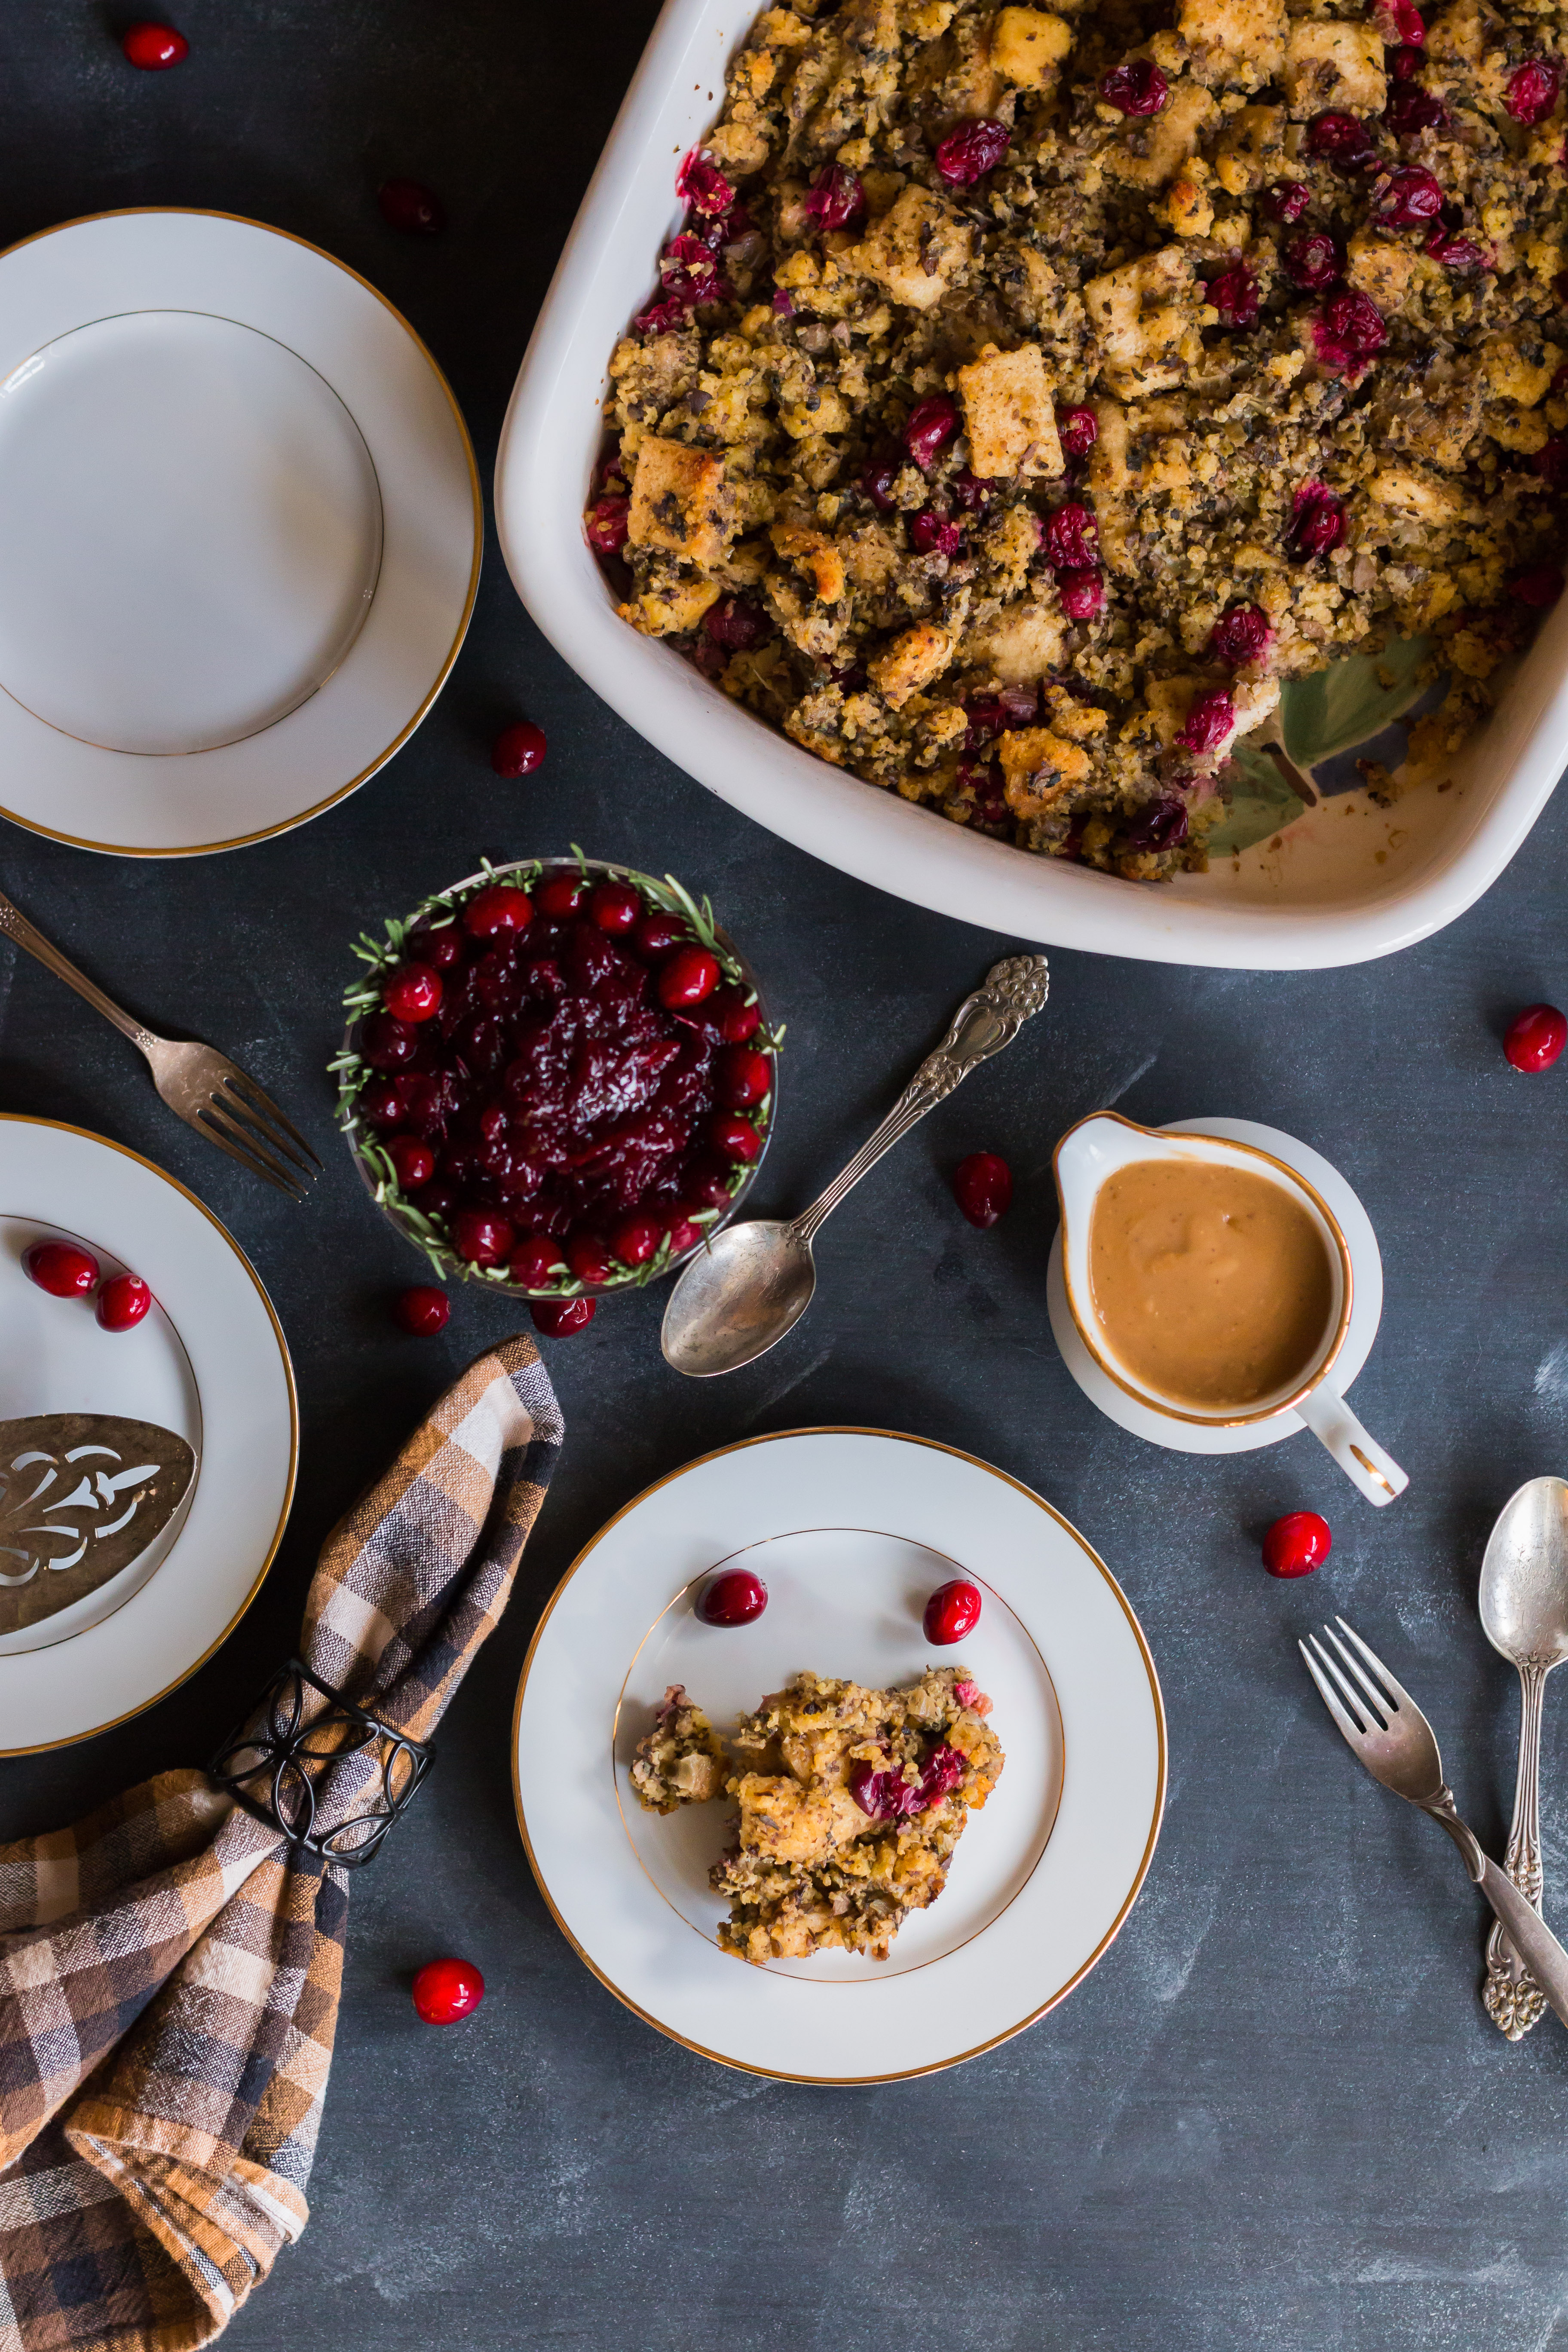 Overhead shot of stuffing in a rectangular casserole dish, cranberry sauce in a round serving dish lined with cranberries and rosemary, gravy in a sauce server, three small plates with a serving of stuffing, a napkin, and silverware.